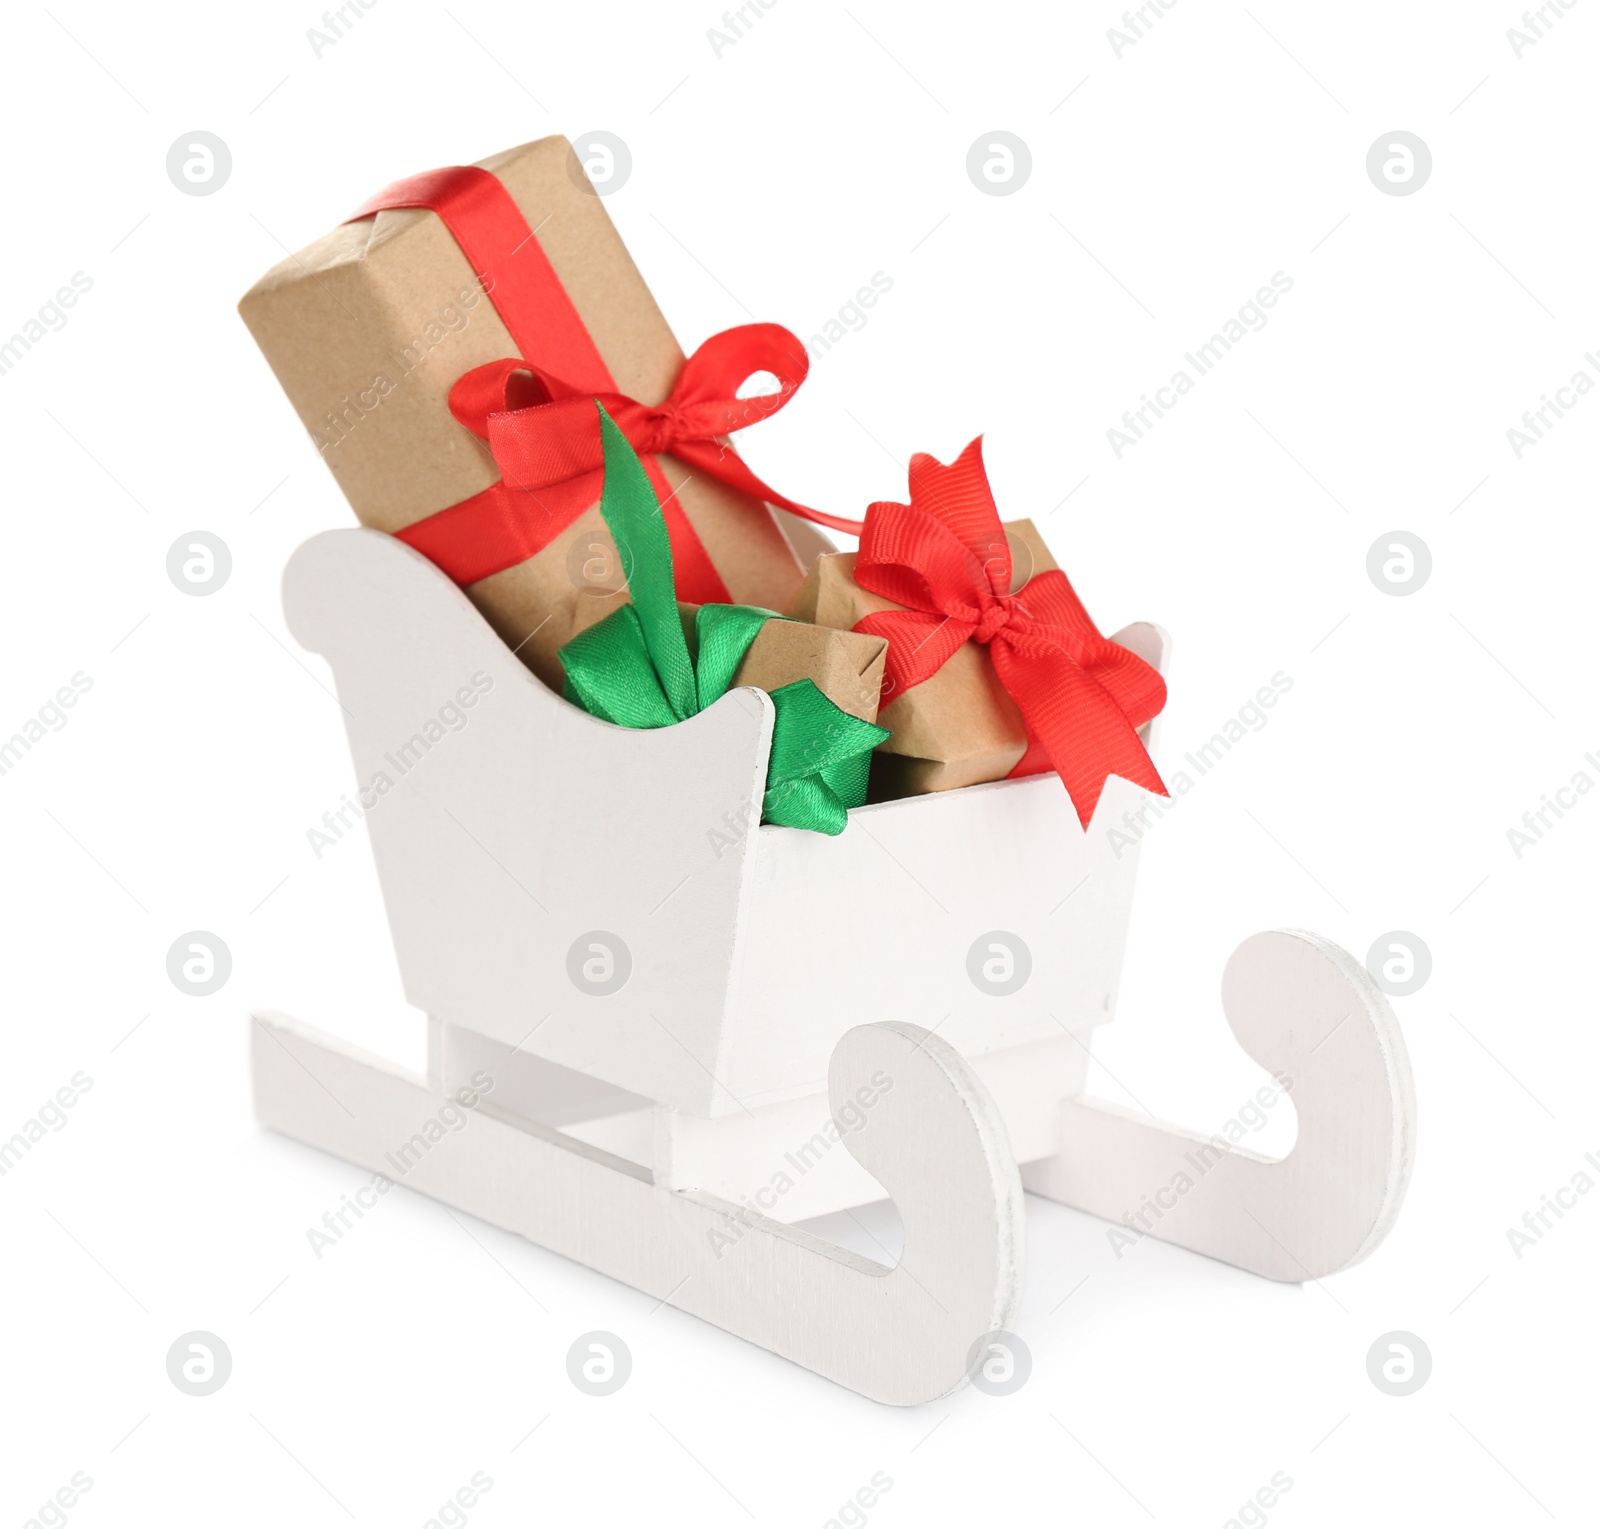 Photo of Wooden sleigh with presents on white background. Christmas holiday decor